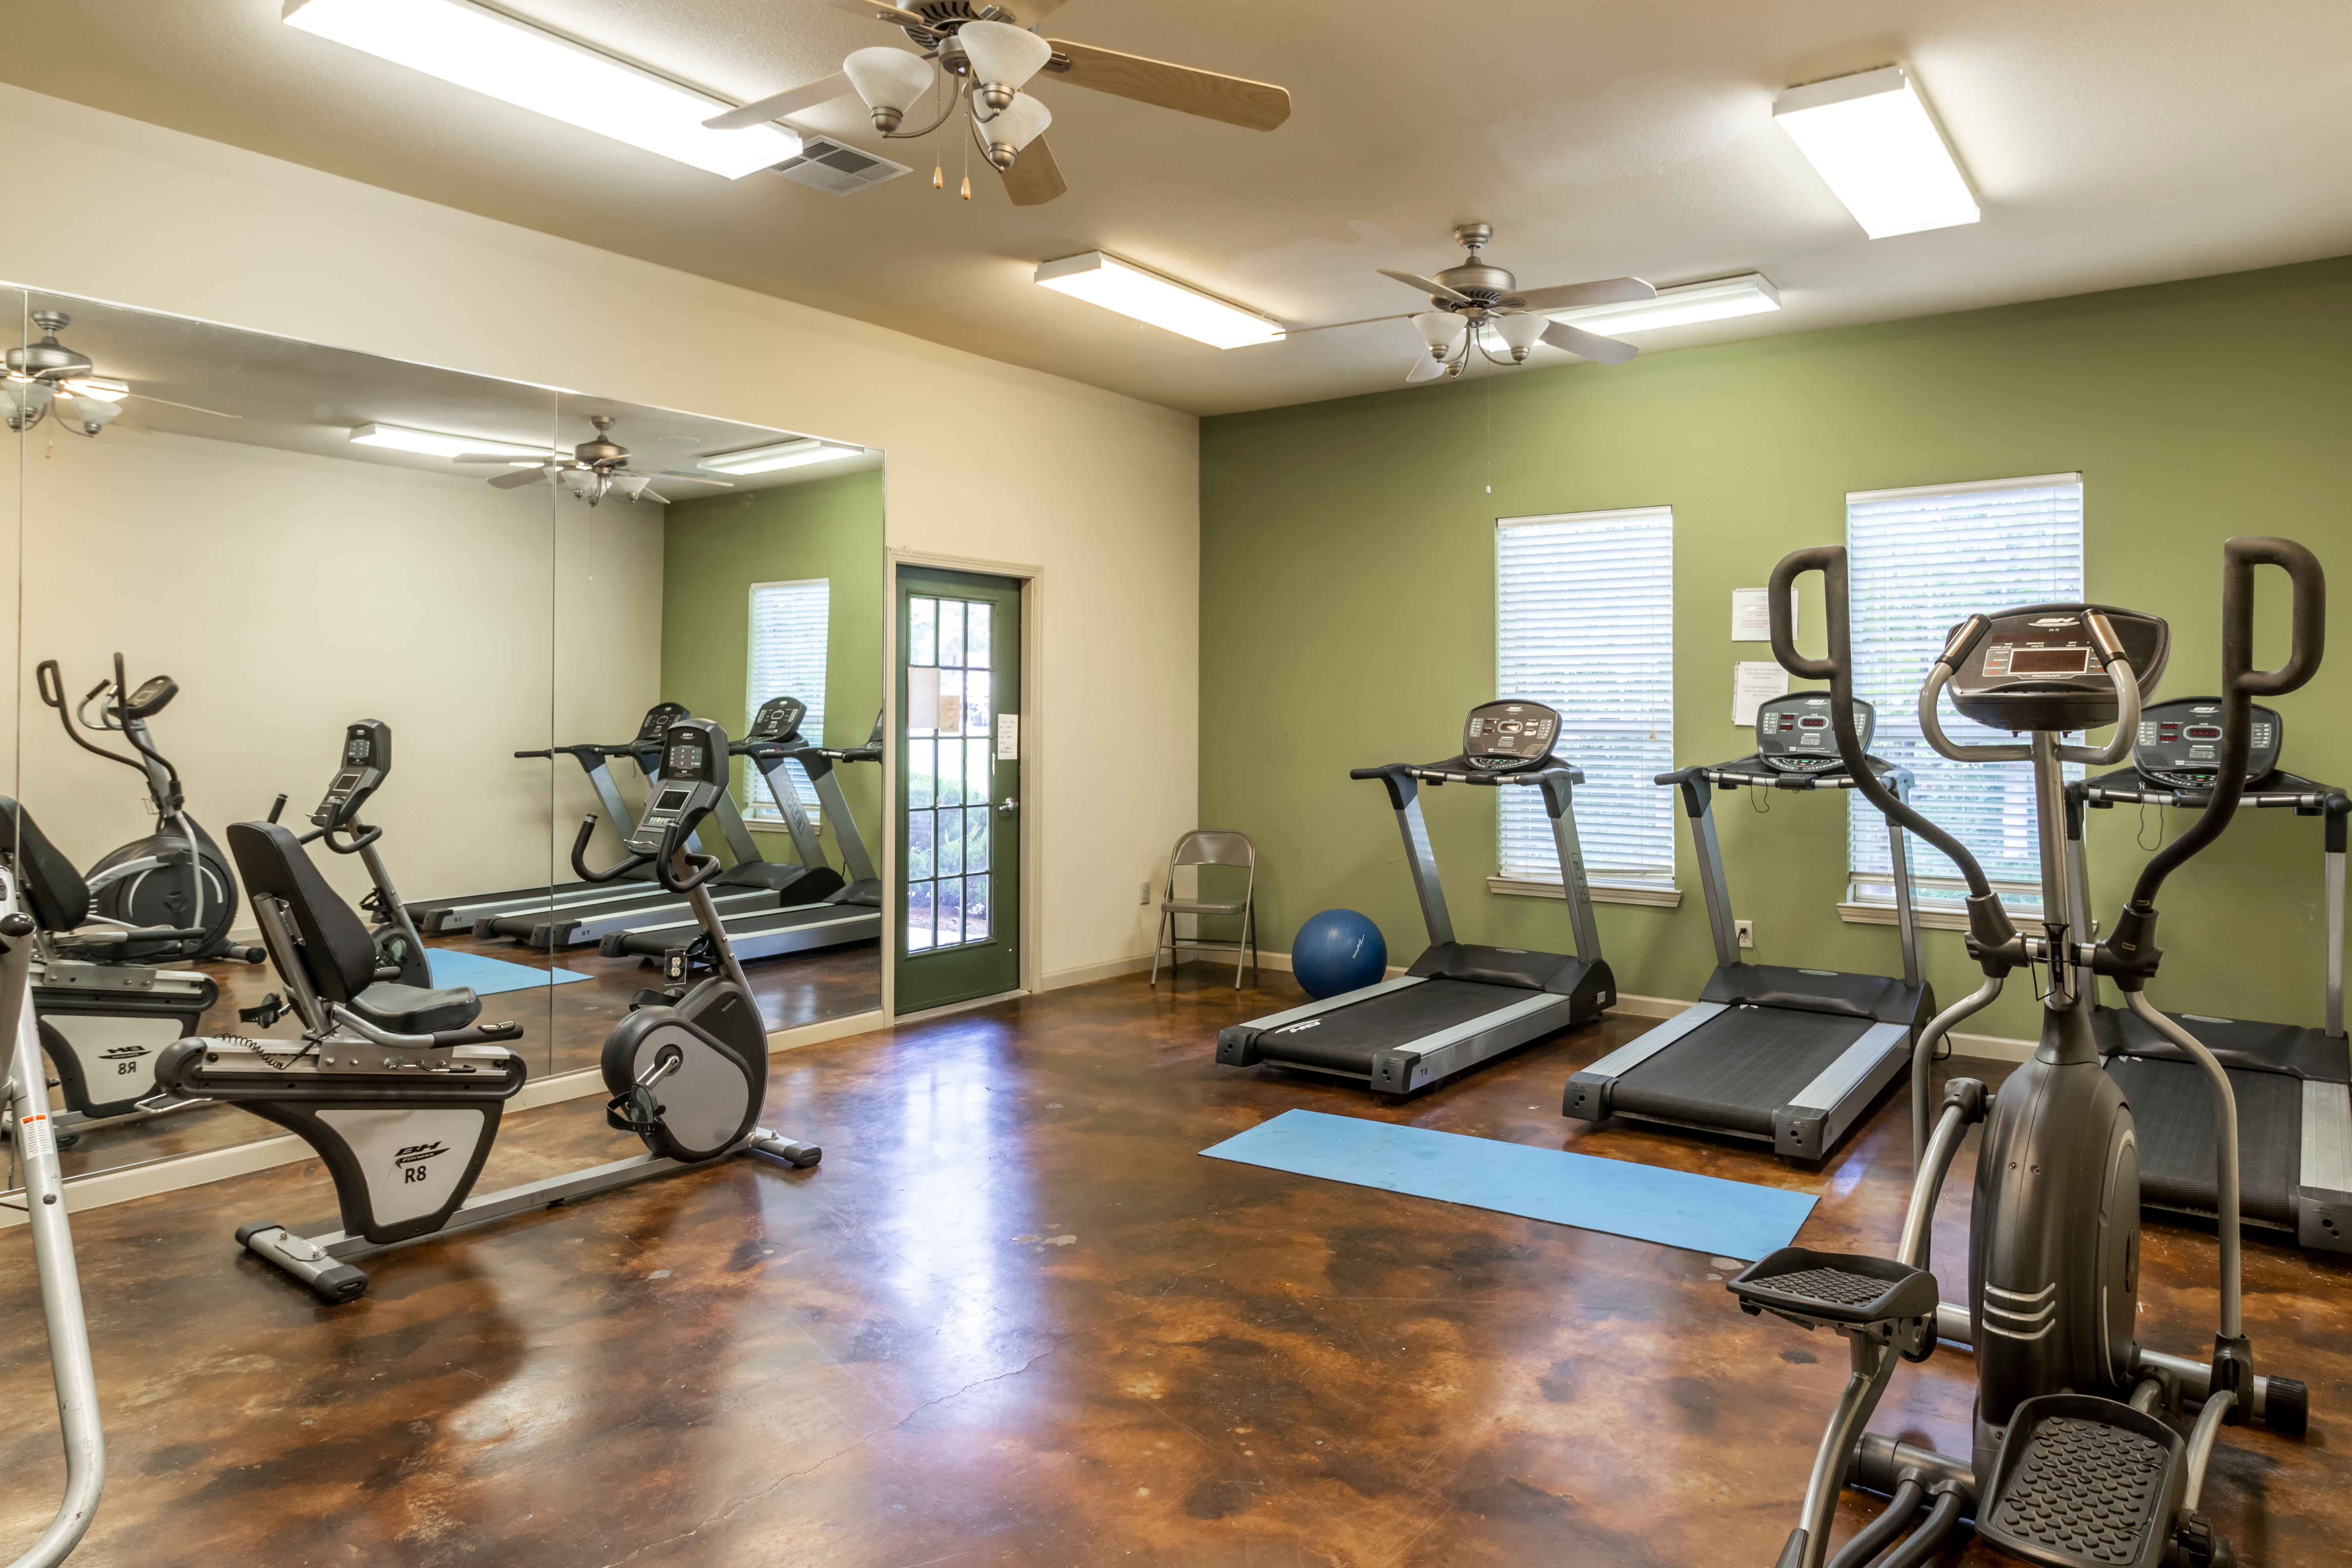 A fitness center with individual workout stations at Woodside Manor in Conroe, Texas